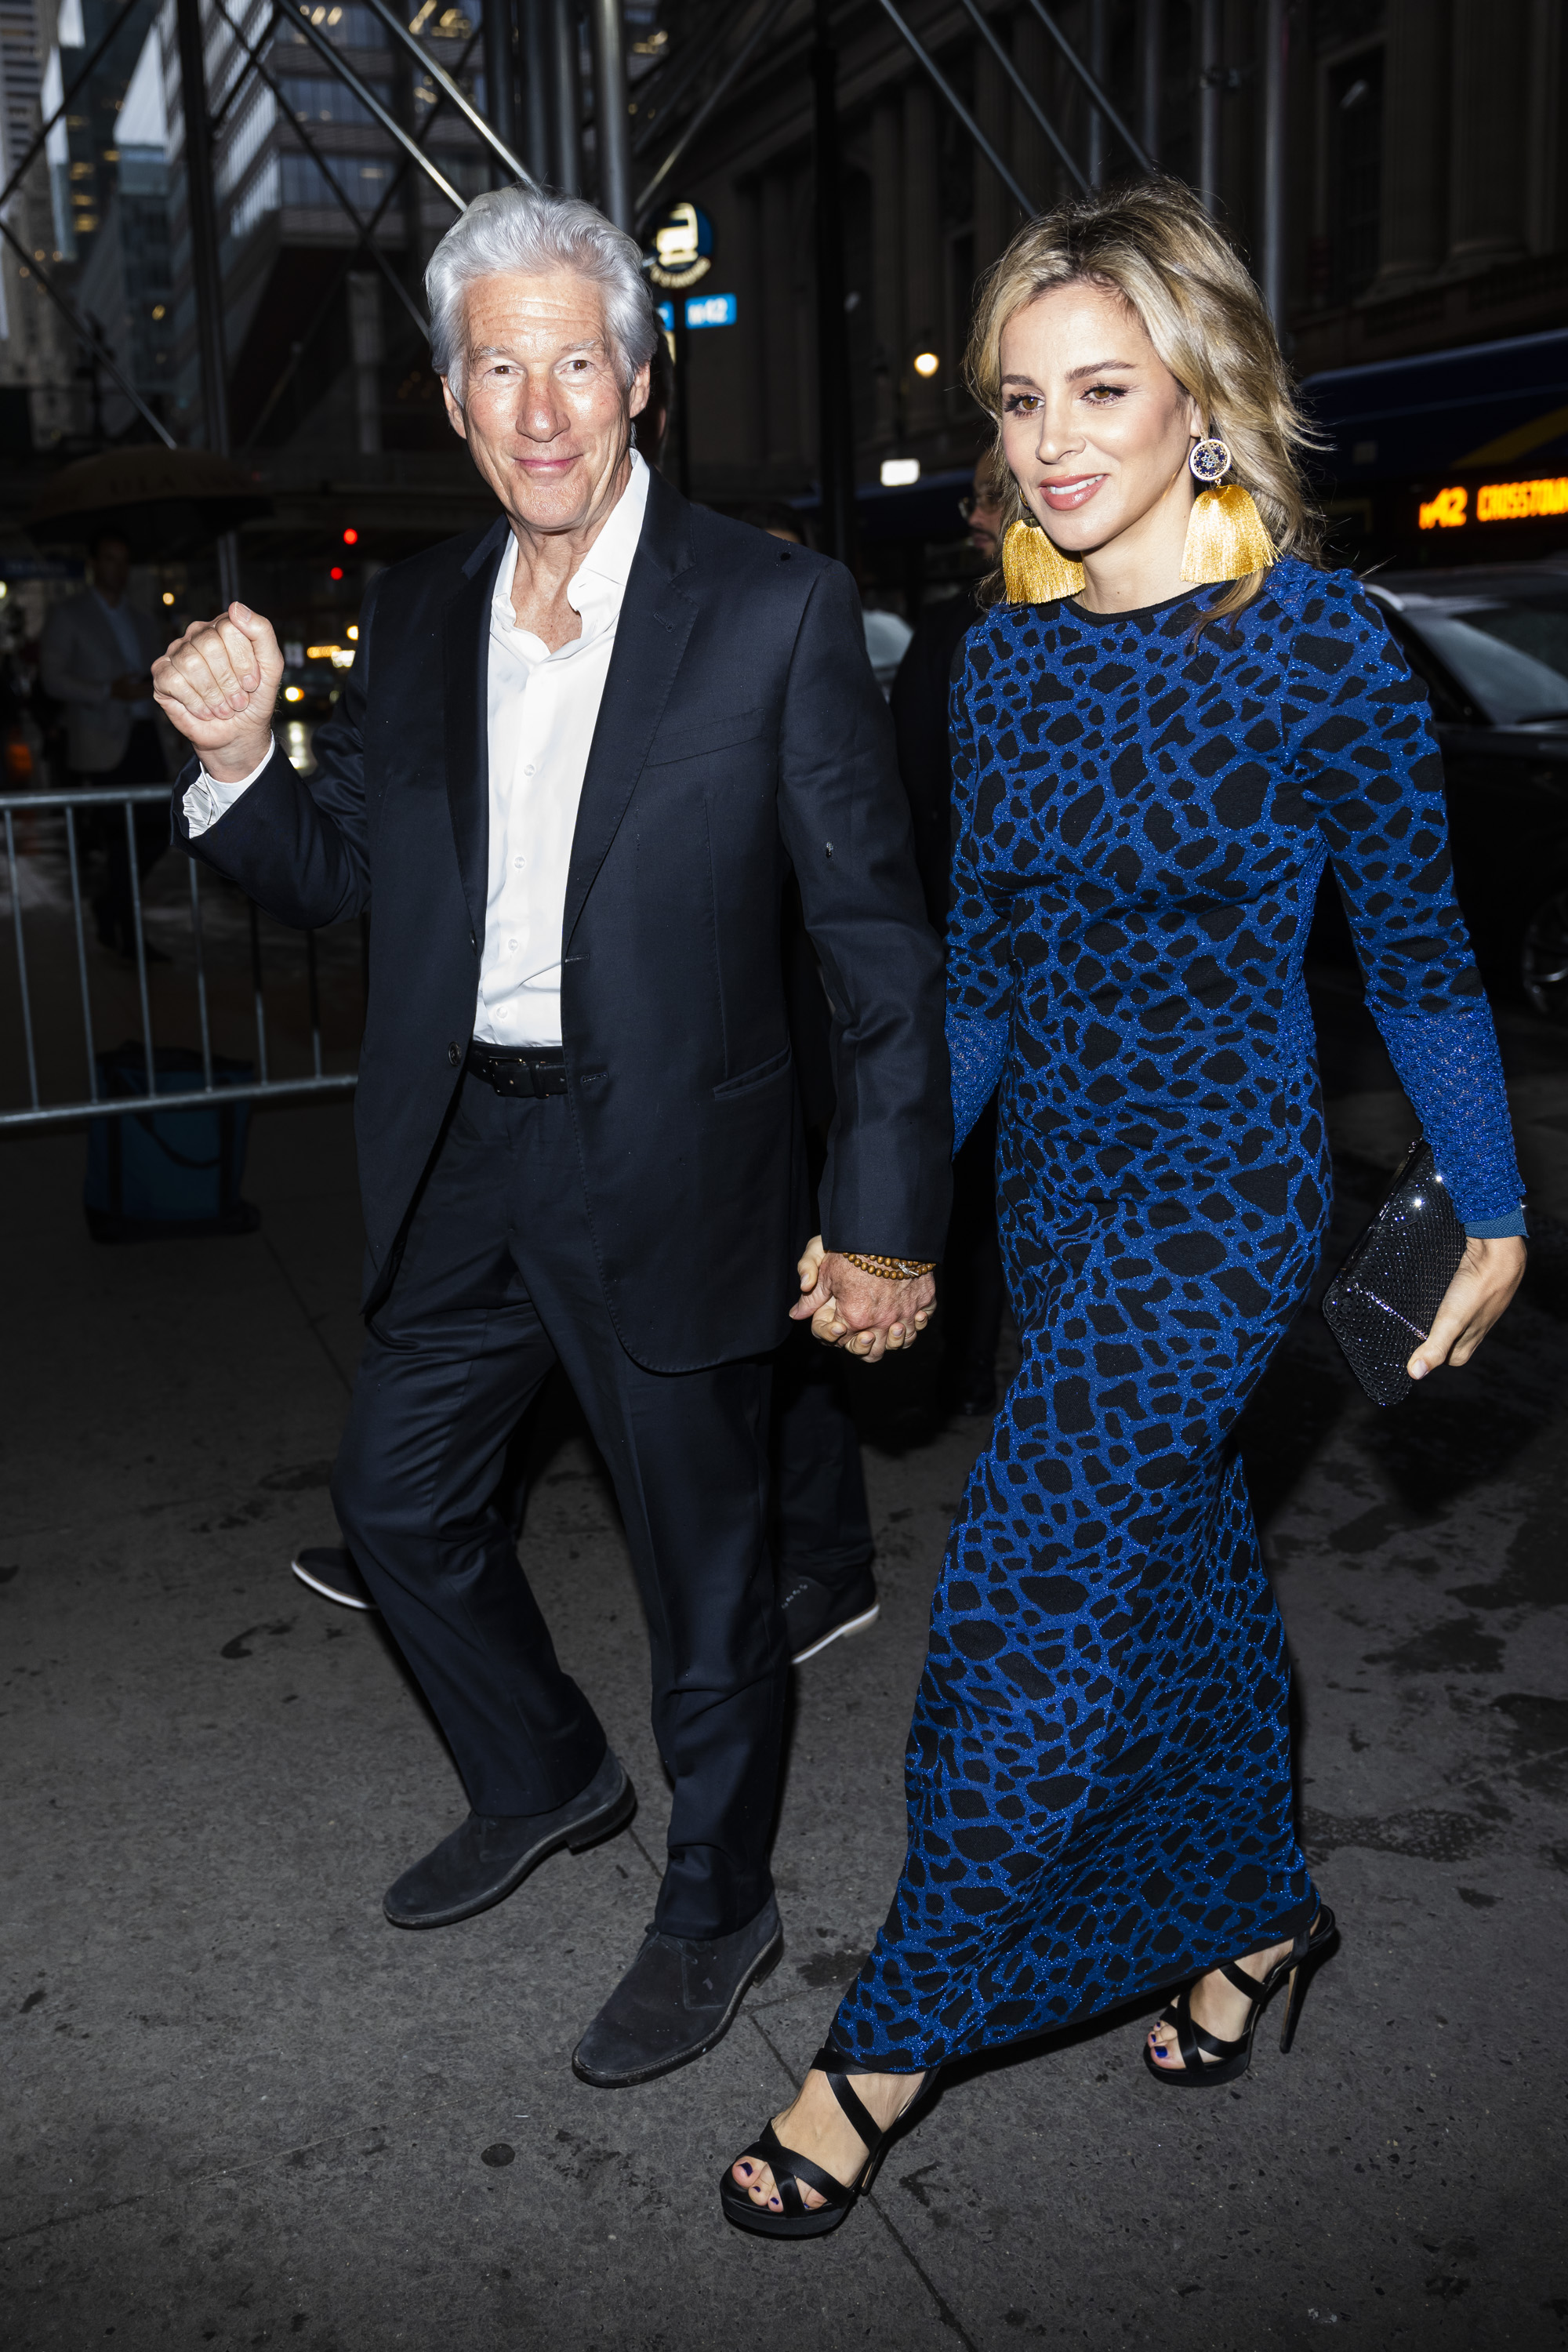 Richard Gere and Alejandra Silva in New York in 2022 | Source: Getty Images